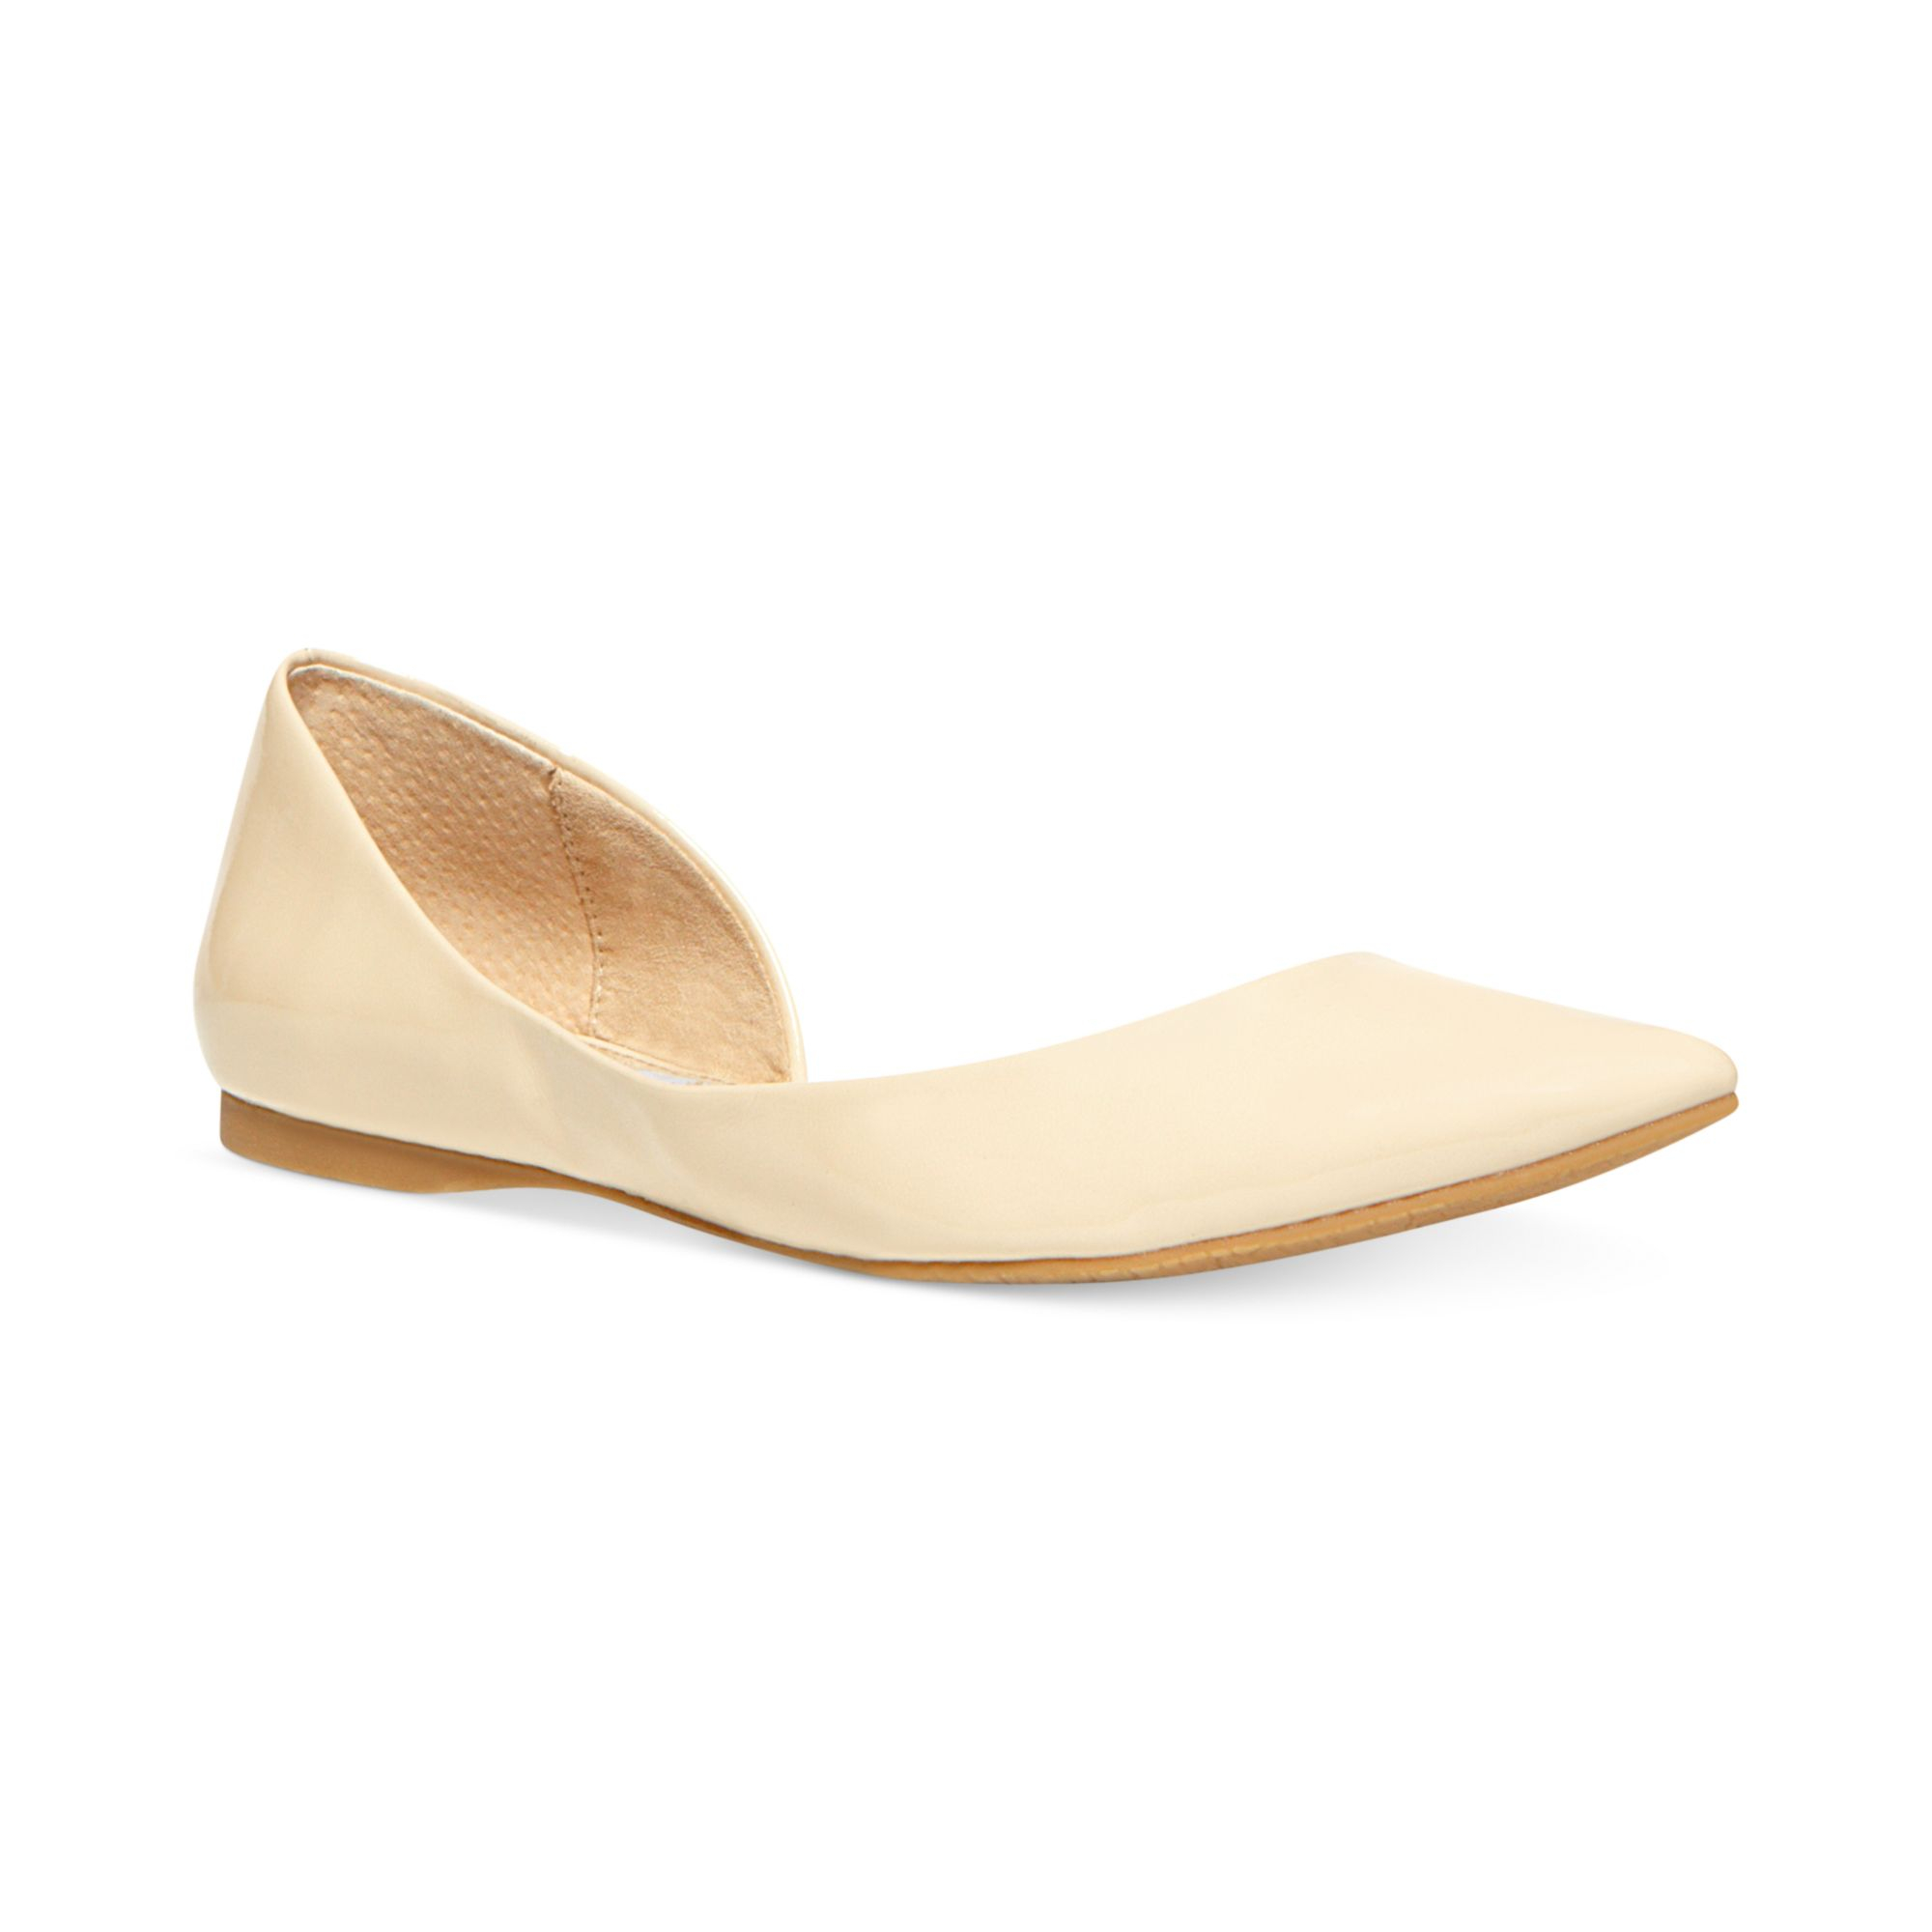 Lyst - Steve Madden Women's Elusion D'orsay Flats in Natural